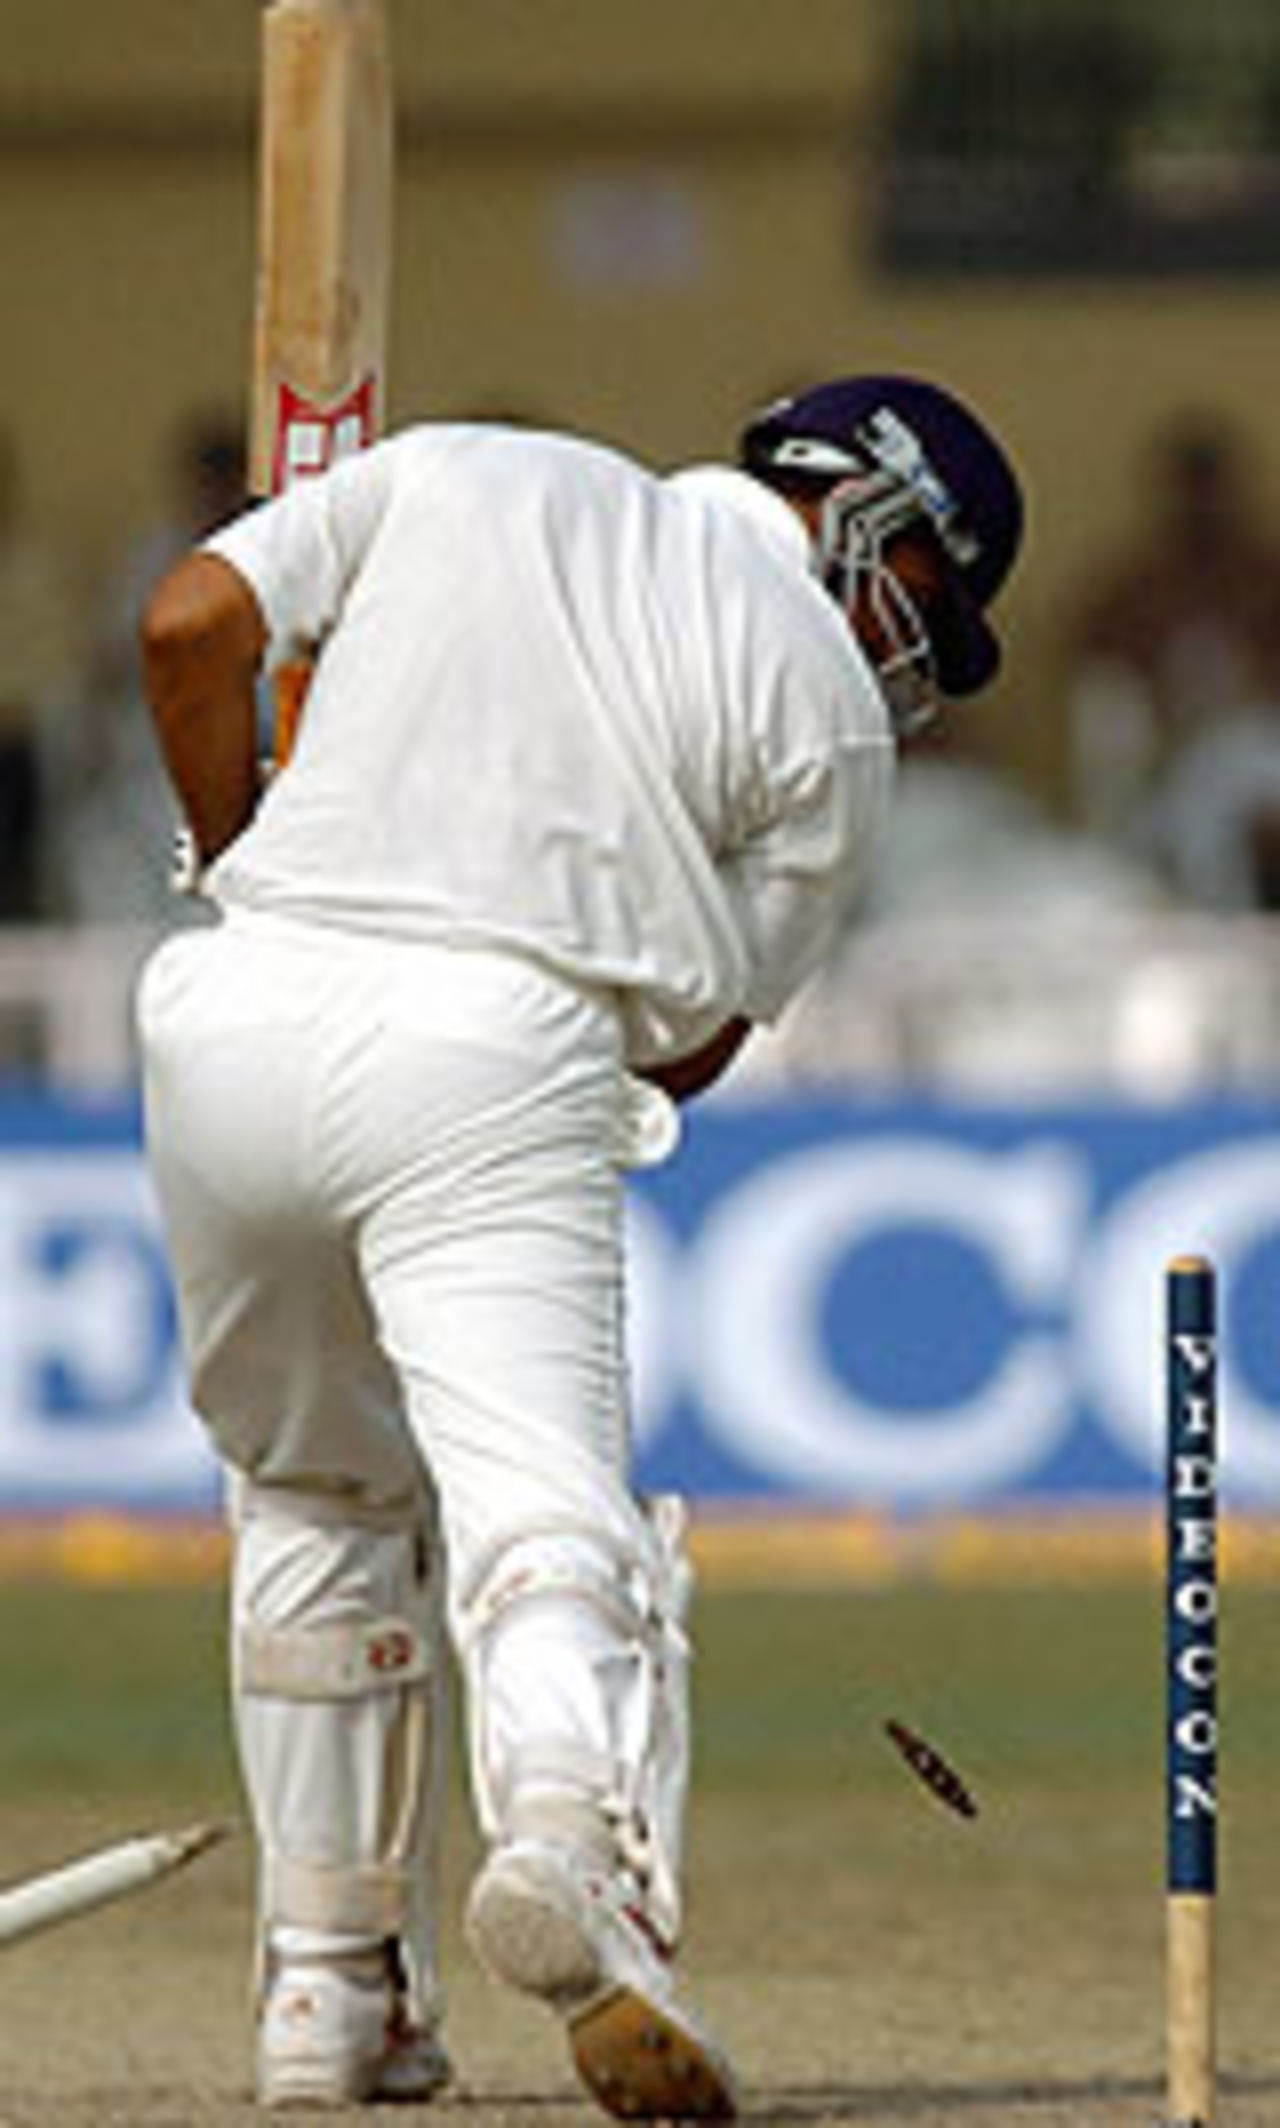 Zaheer Khan loses his stumps, India v South Africa, 1st Test, Kanpur, 5th day, November 24, 2004